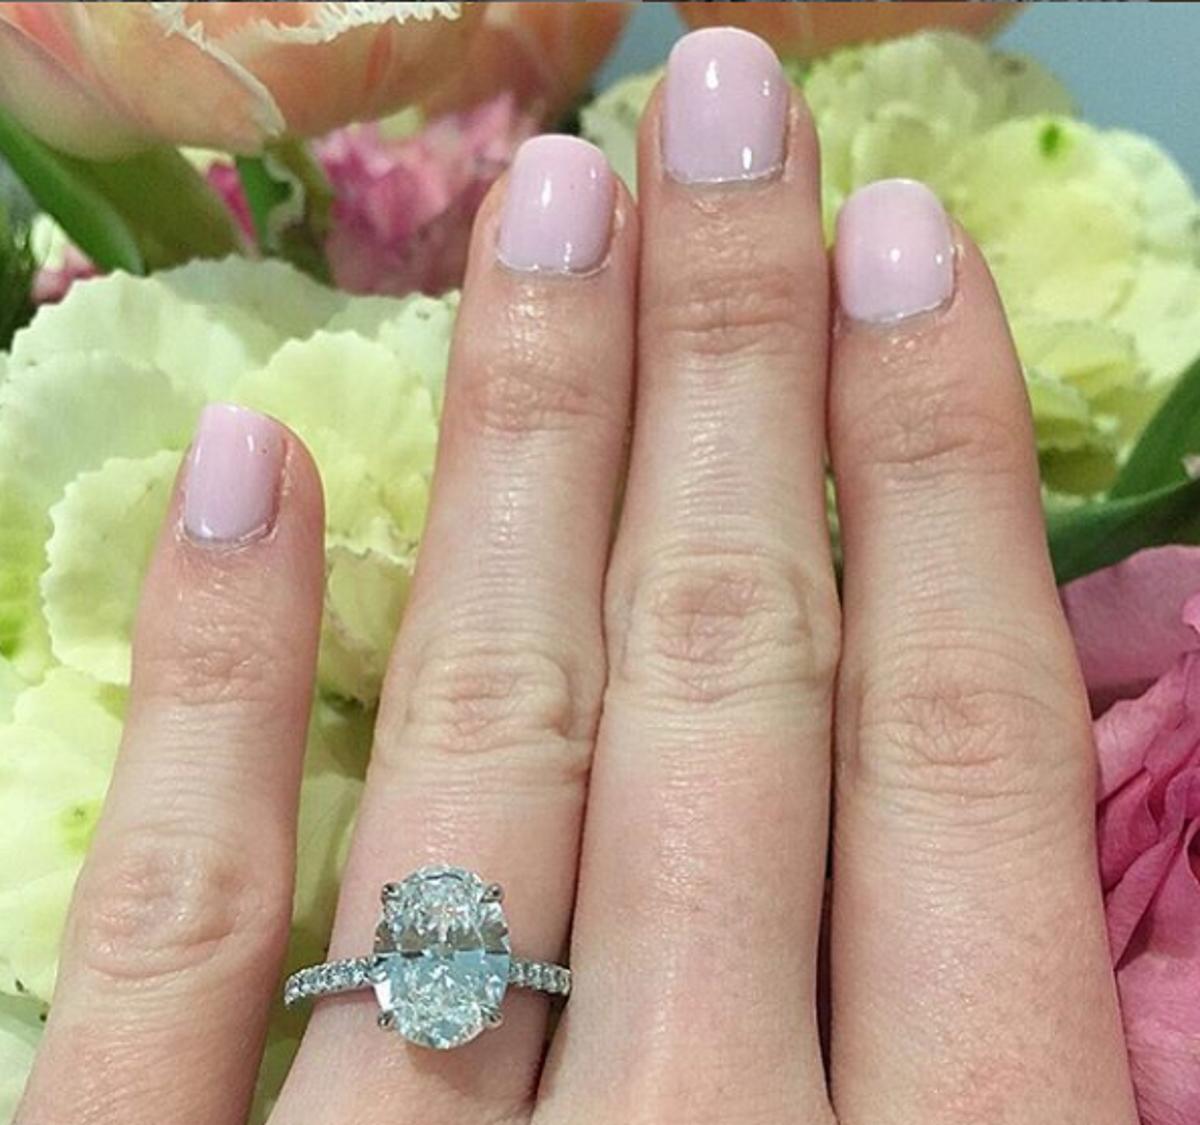 This eye-catching 2 carat GIA certified oval cut diamond ring that has excellent G color, a completely eye clean appearance, and gorgeous, lively brilliance! Oval cuts are one of the most fashionable and sought after diamond cuts, and its elongated